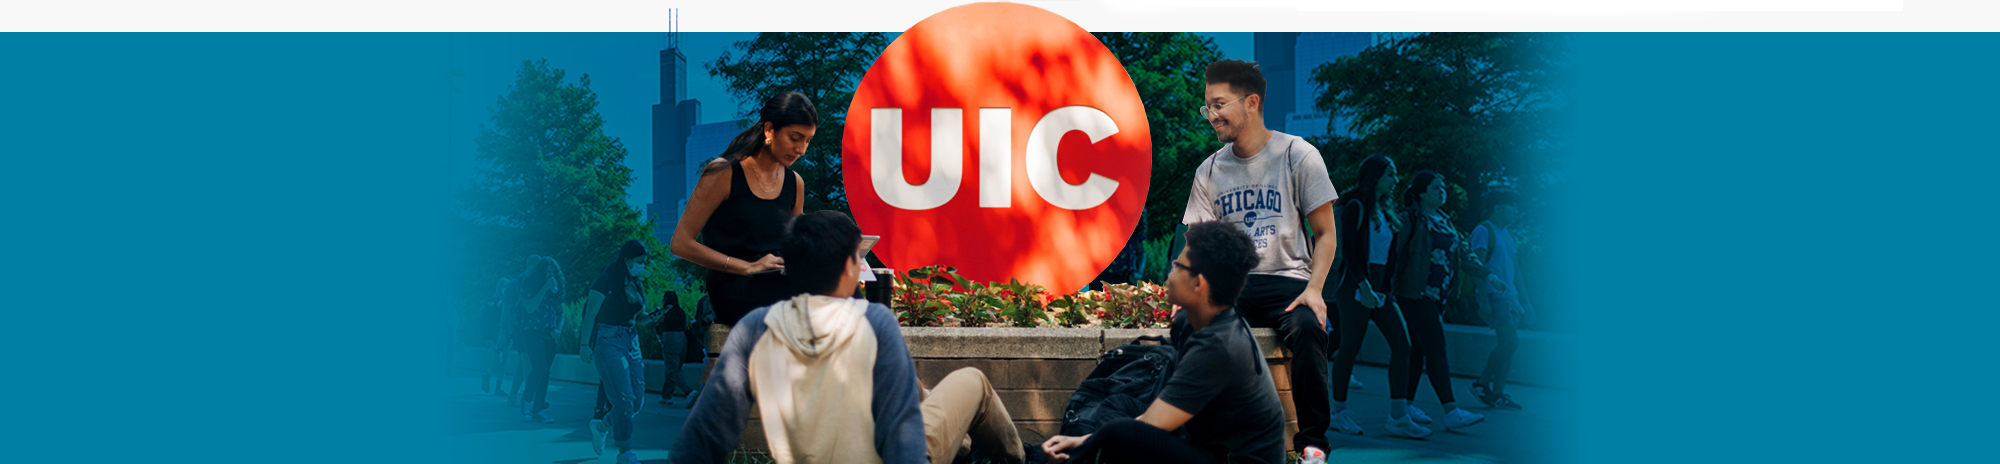 STUDENTS AT UIC DOT STRUCTURE ON CAMPUS